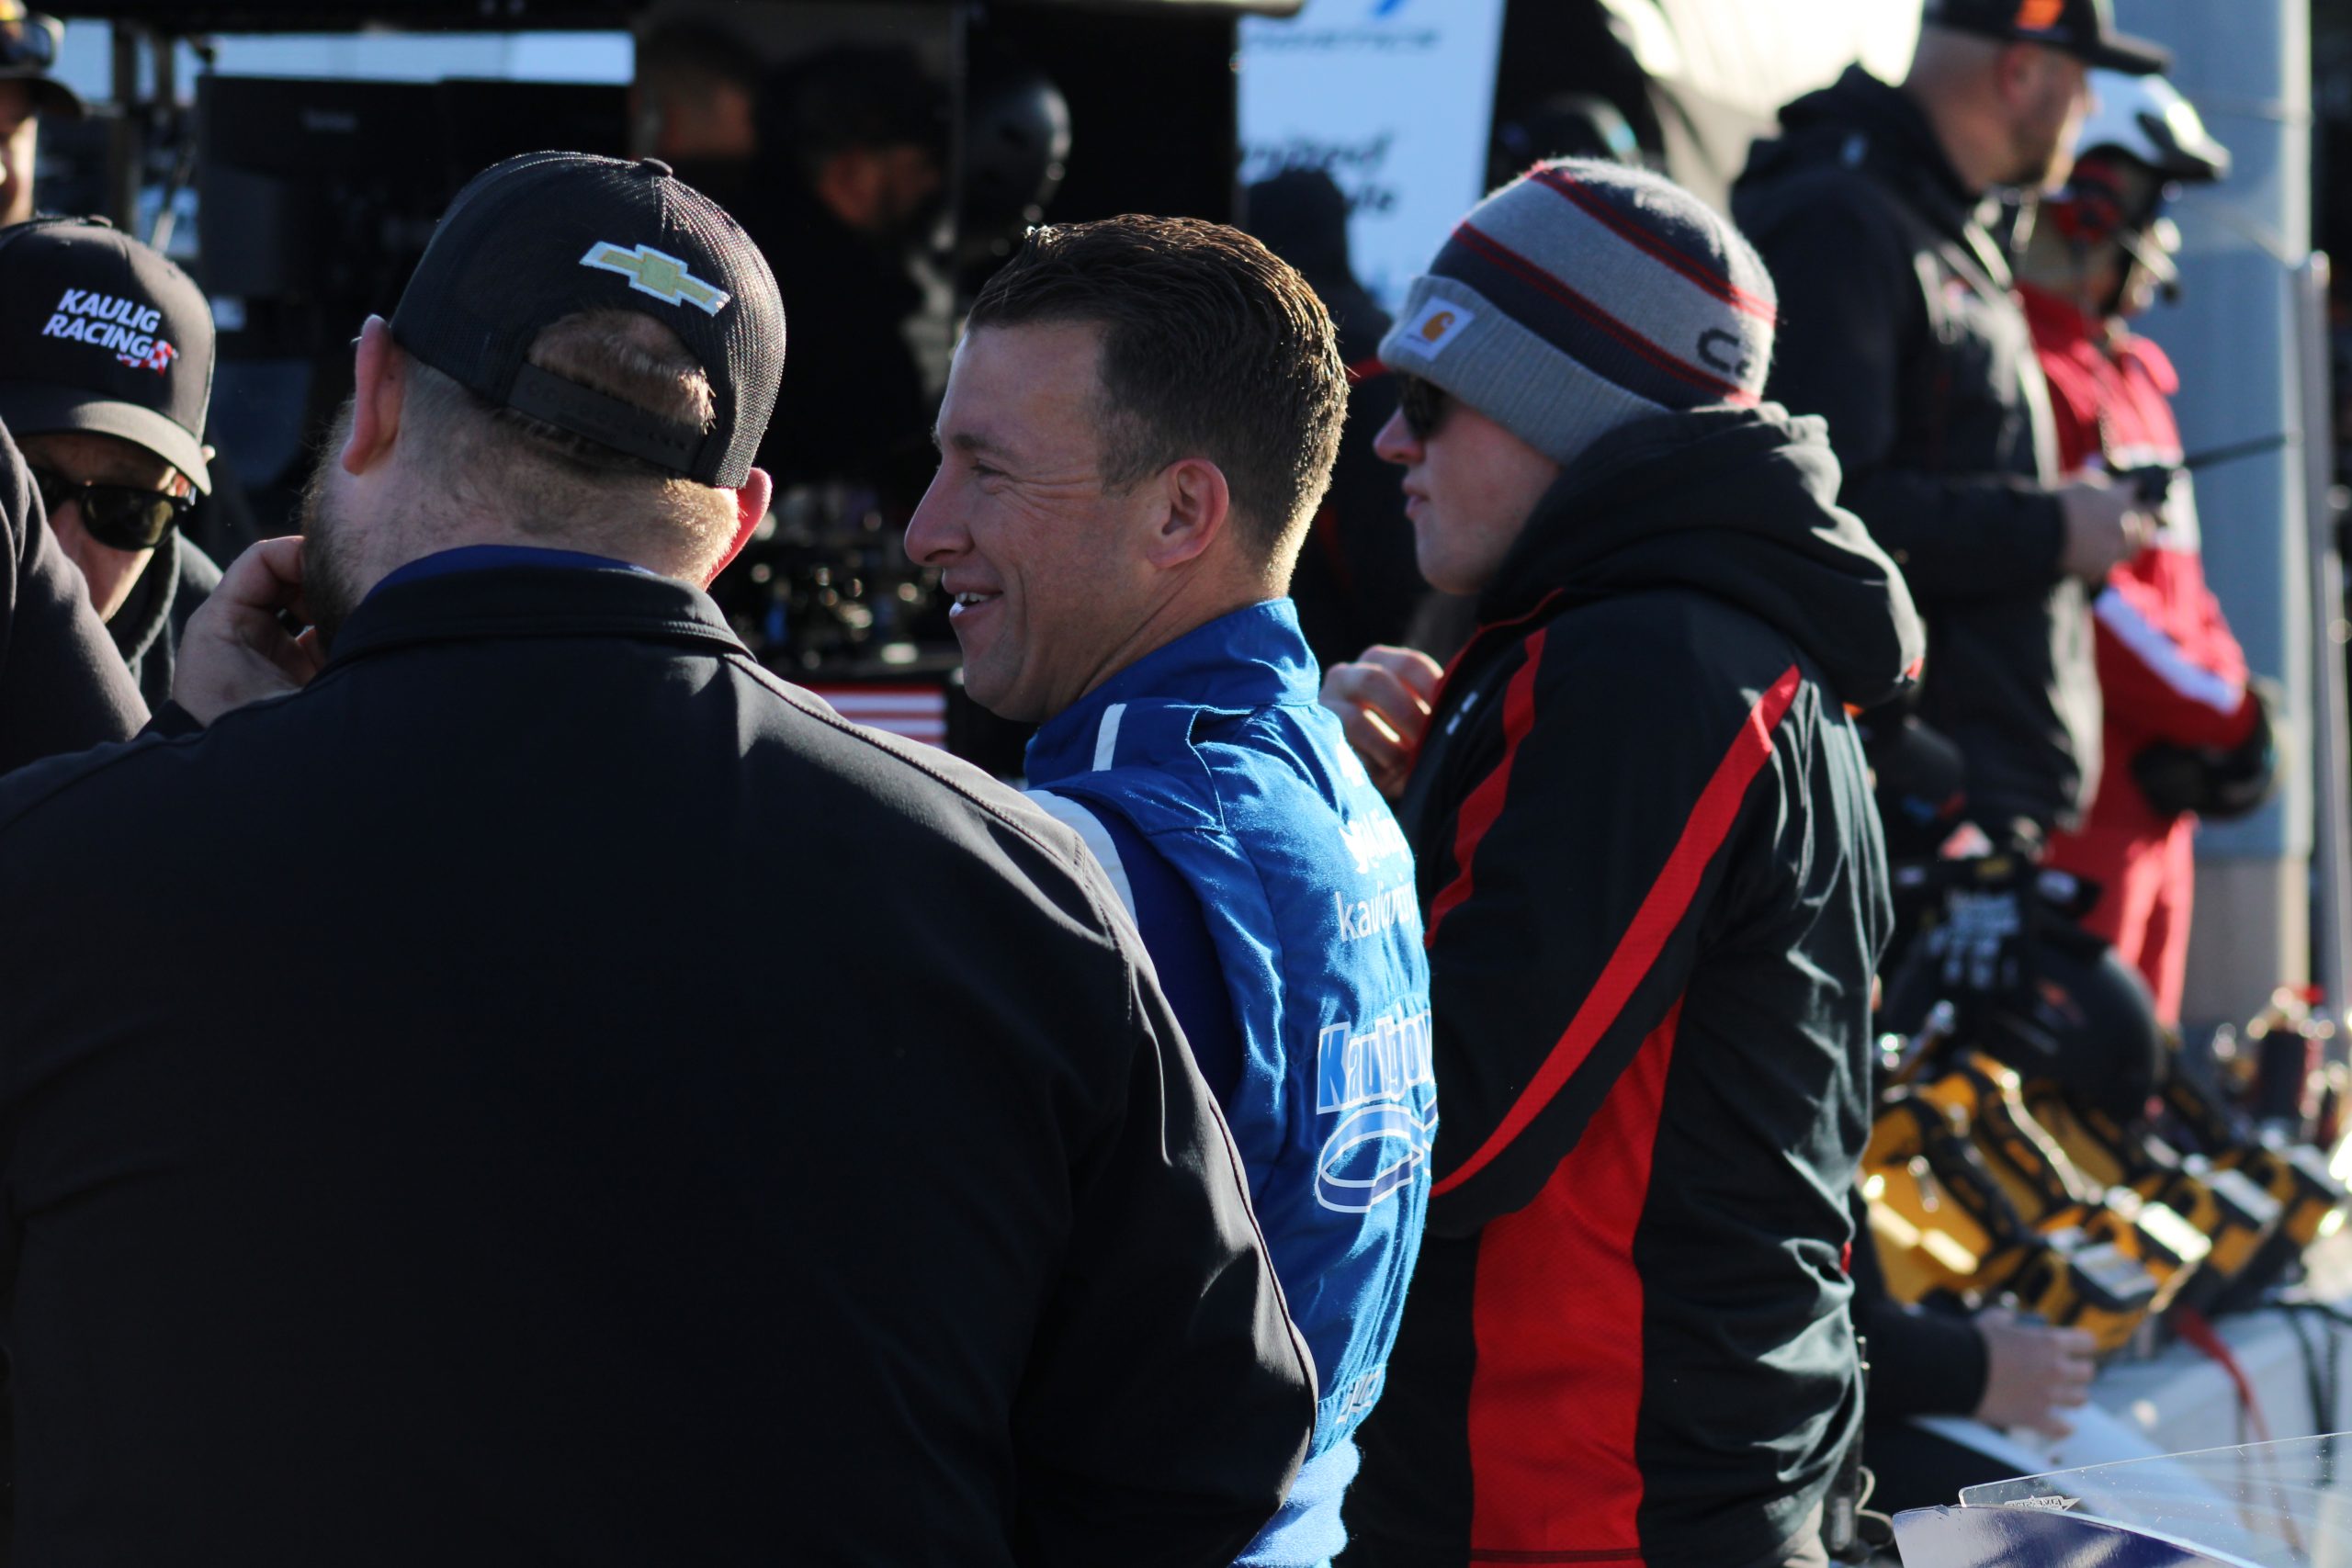 Allmendinger enjoys time with his crew ahead of a chilly race at Richmond. (Photo: Ryan Daley | The Podium Finish)